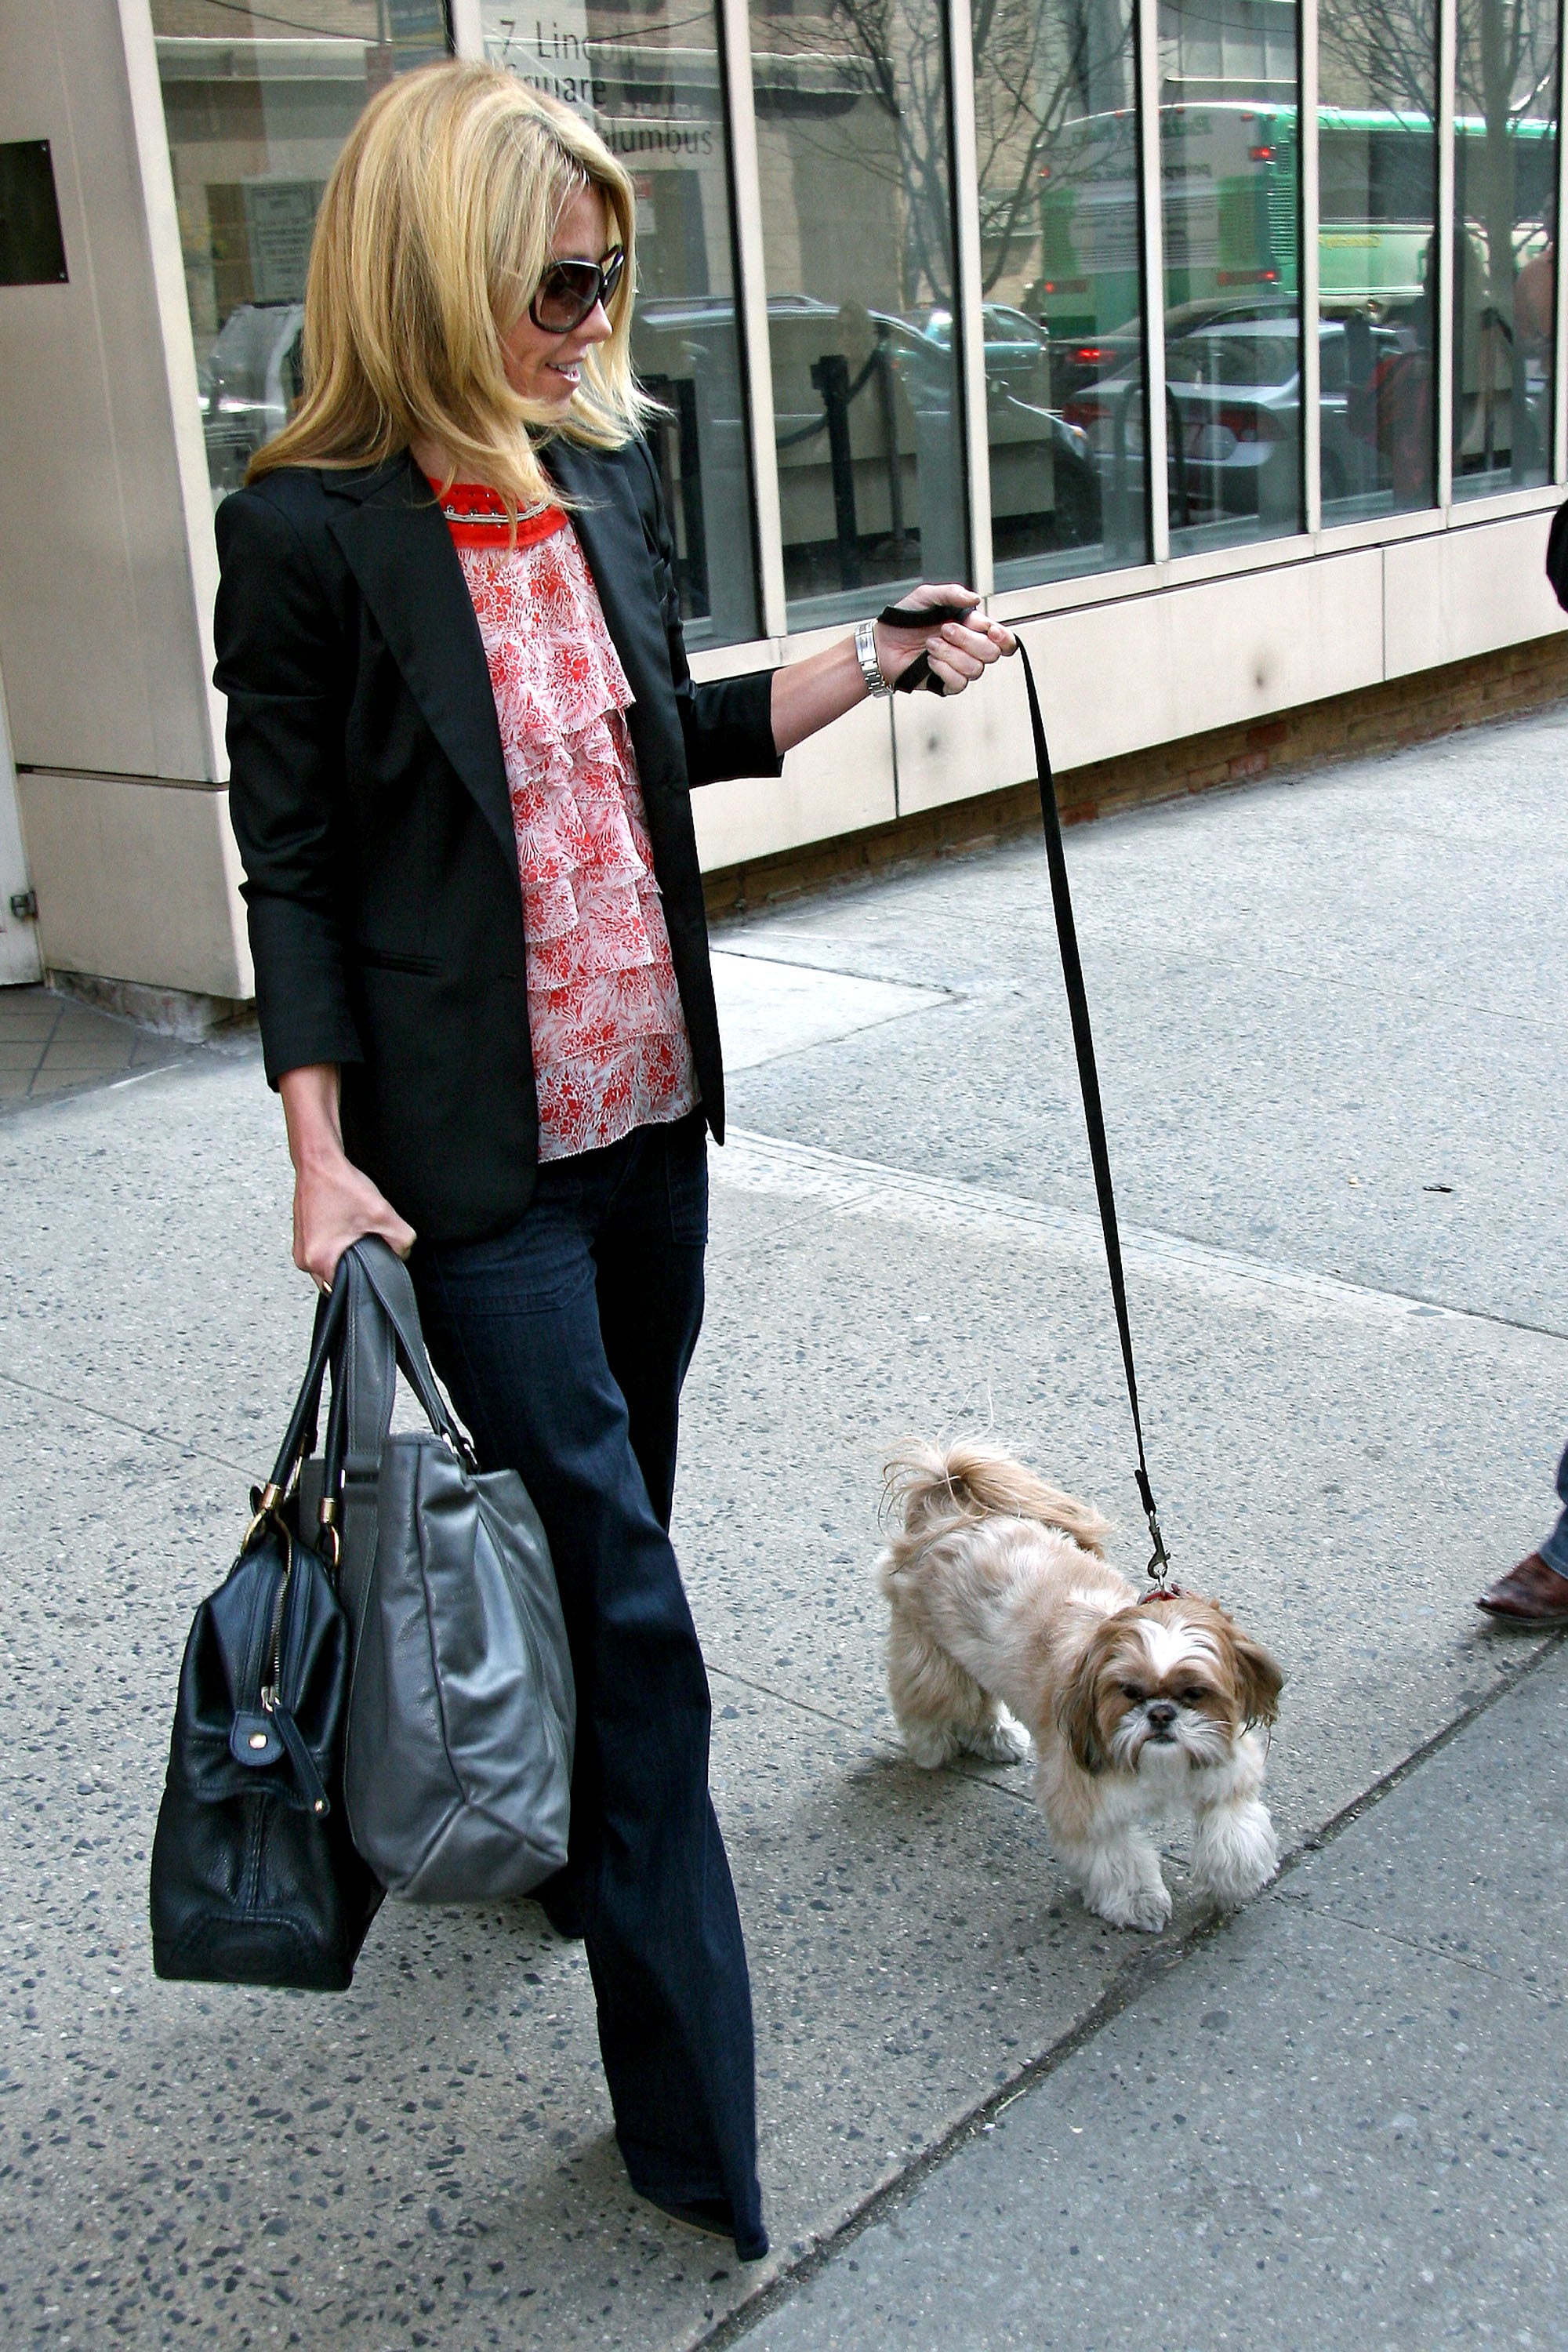 Chewy Leads Kelly Ripa From ABC 